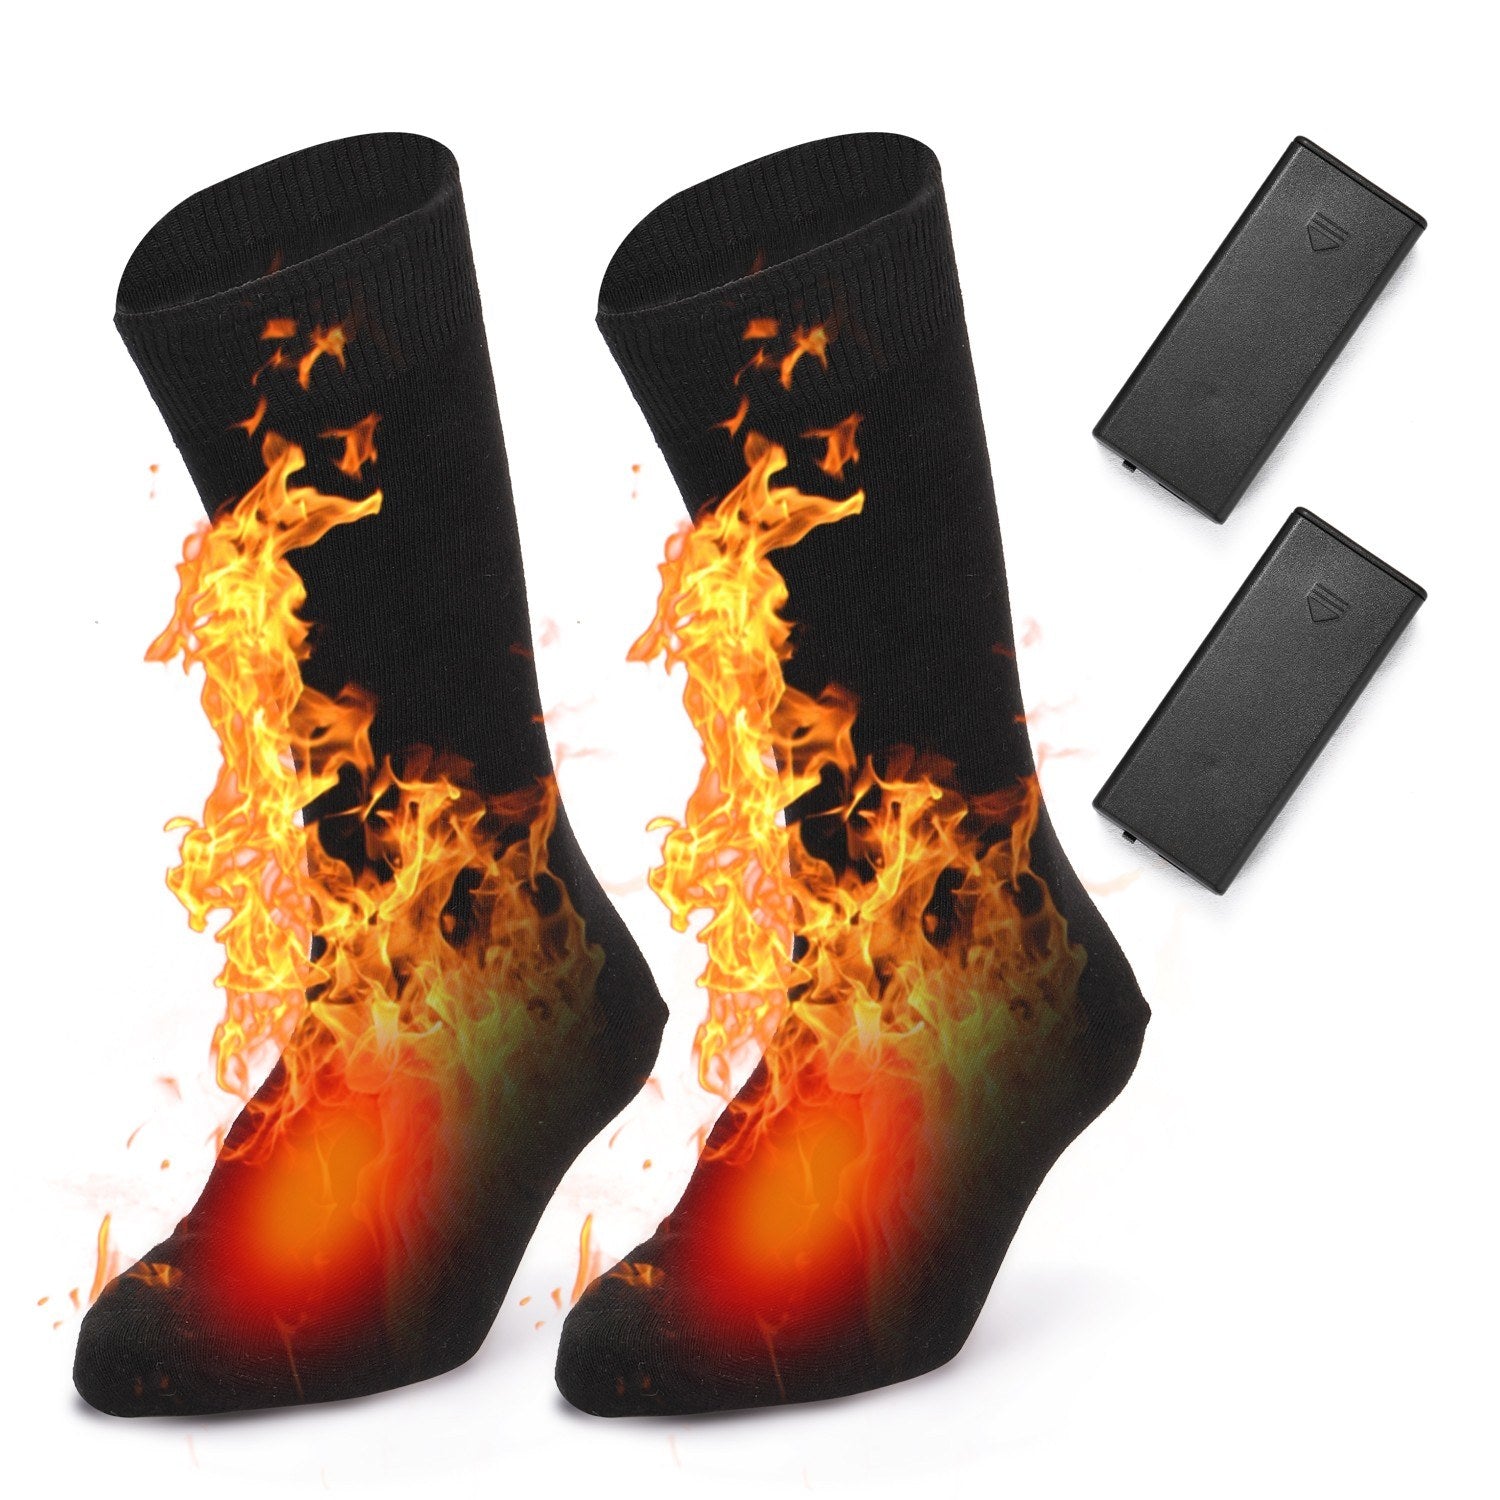 1Pair Heated Socks Battery Powered Cold Weather Thermal Heating Socks Electric Heated Foot Warmer for Hunting Skiing Campin - 2Pcs Batteries Required